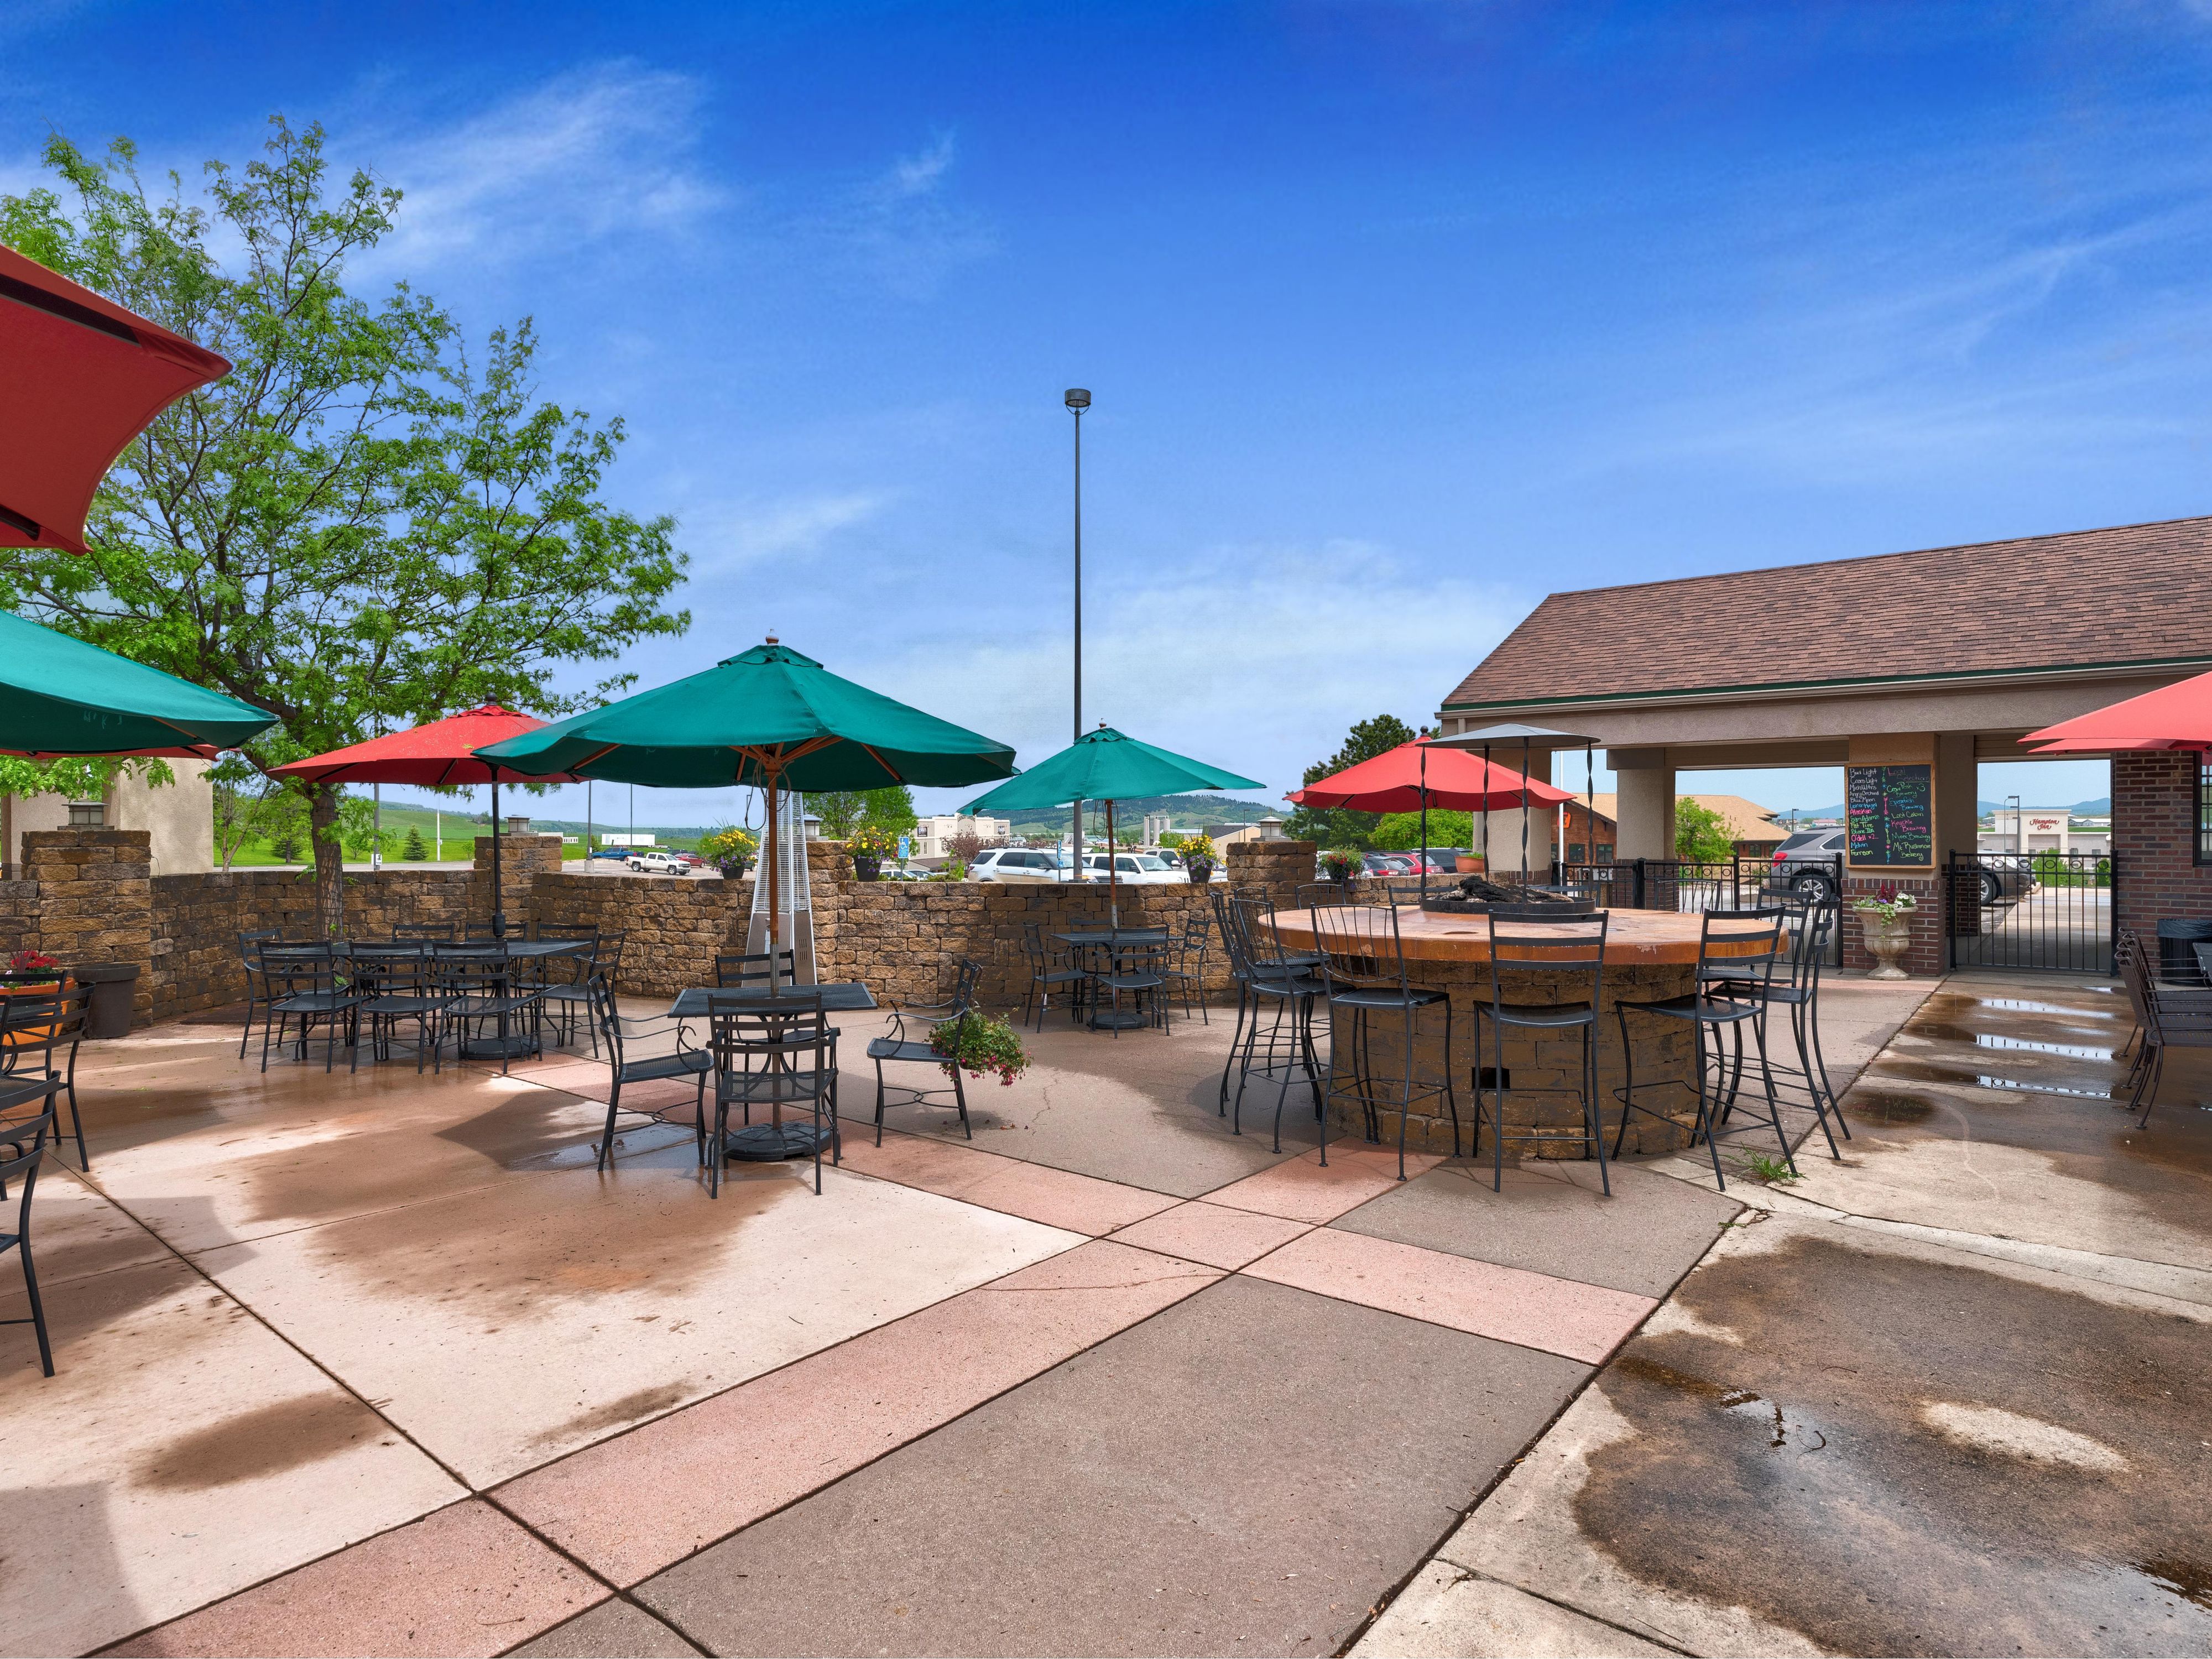 Our on-site restaurant, Lucky's 13 Pub, has a friendly, laid-back atmosphere featuring American dishes enjoyed by both kids and adults! Our bar houses 22 beers on tap, featuring several local craft brews, and is the perfect place to enjoy some live entertainment! Stop in to enjoy our spacious outdoor patio!